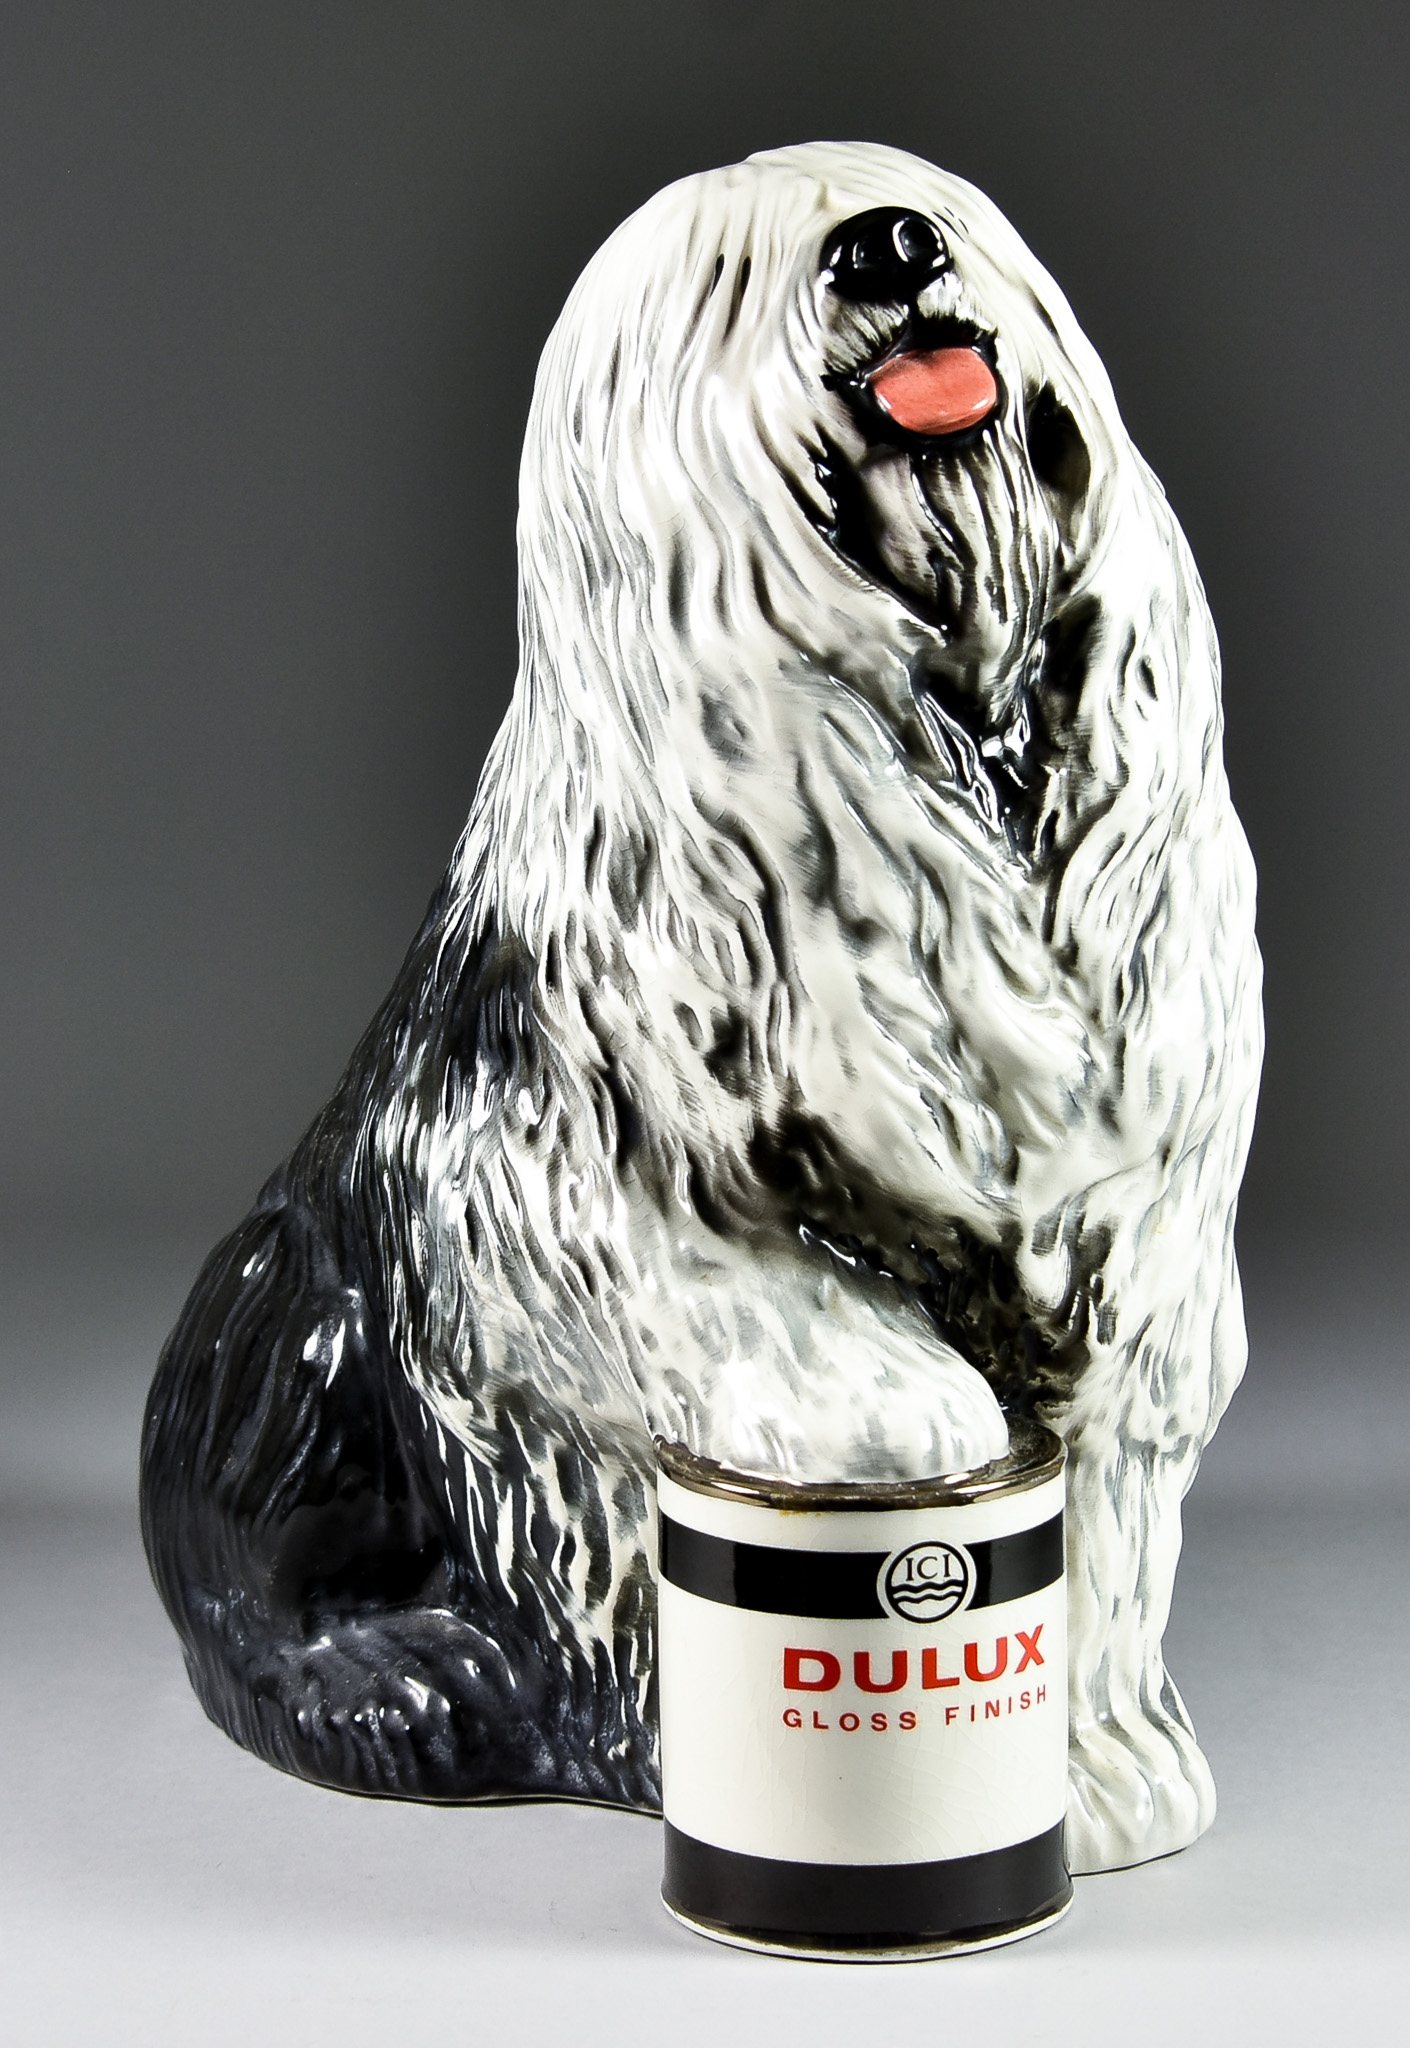 Beswick "The Dulux Dog" Advertising Model, Circa 1970, 12.5ins high This lot appears to be on good